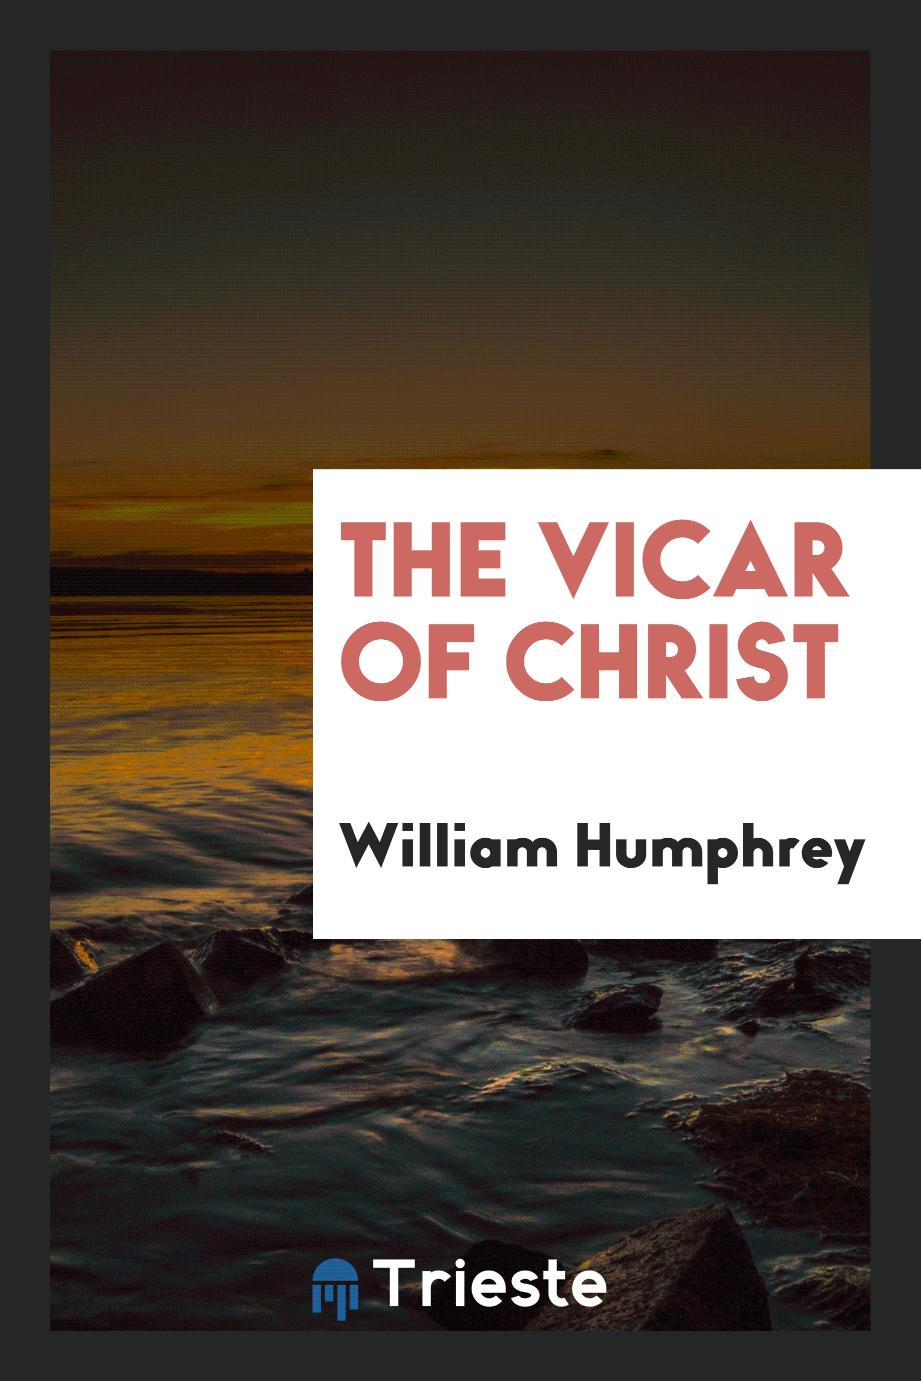 The vicar of Christ